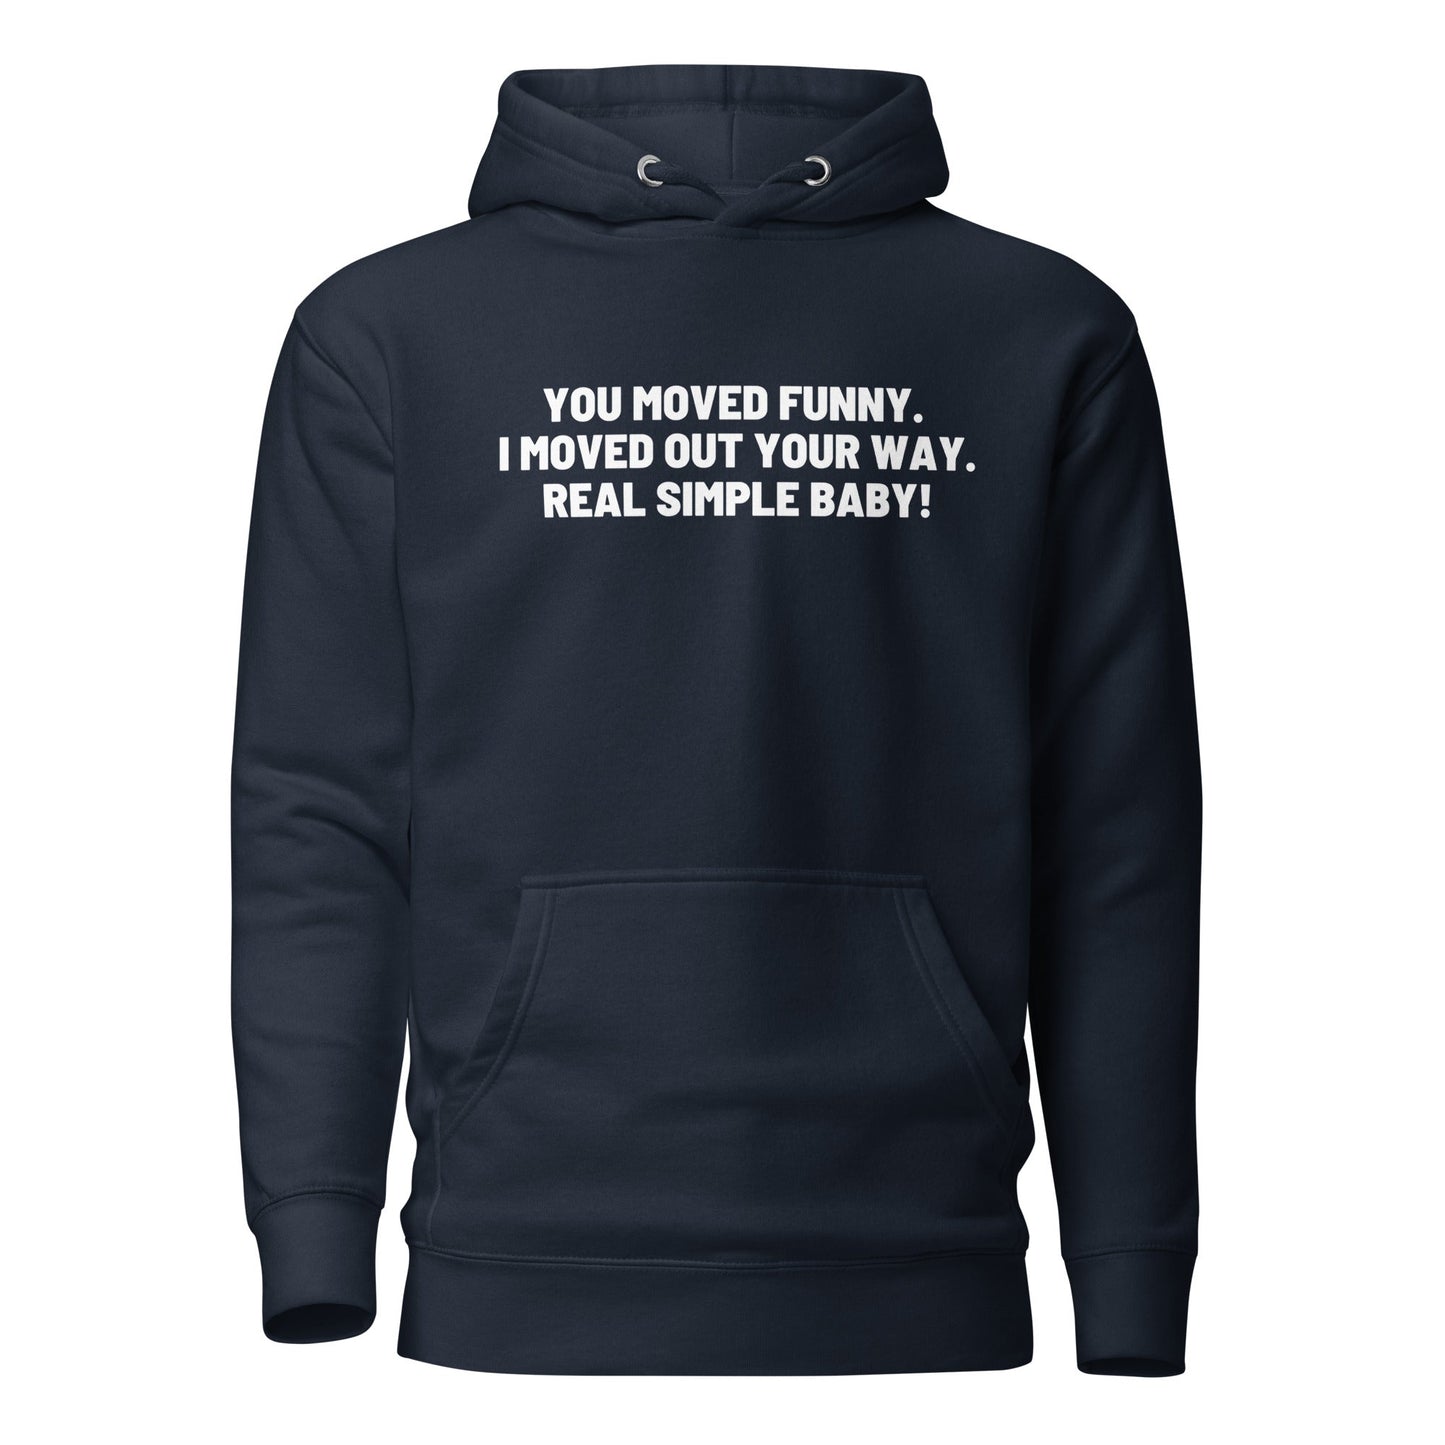 You Moved Funny. I Moved Out Your Way. Real Simple Baby. Unisex Hoodie - Catch This Tea Shirt